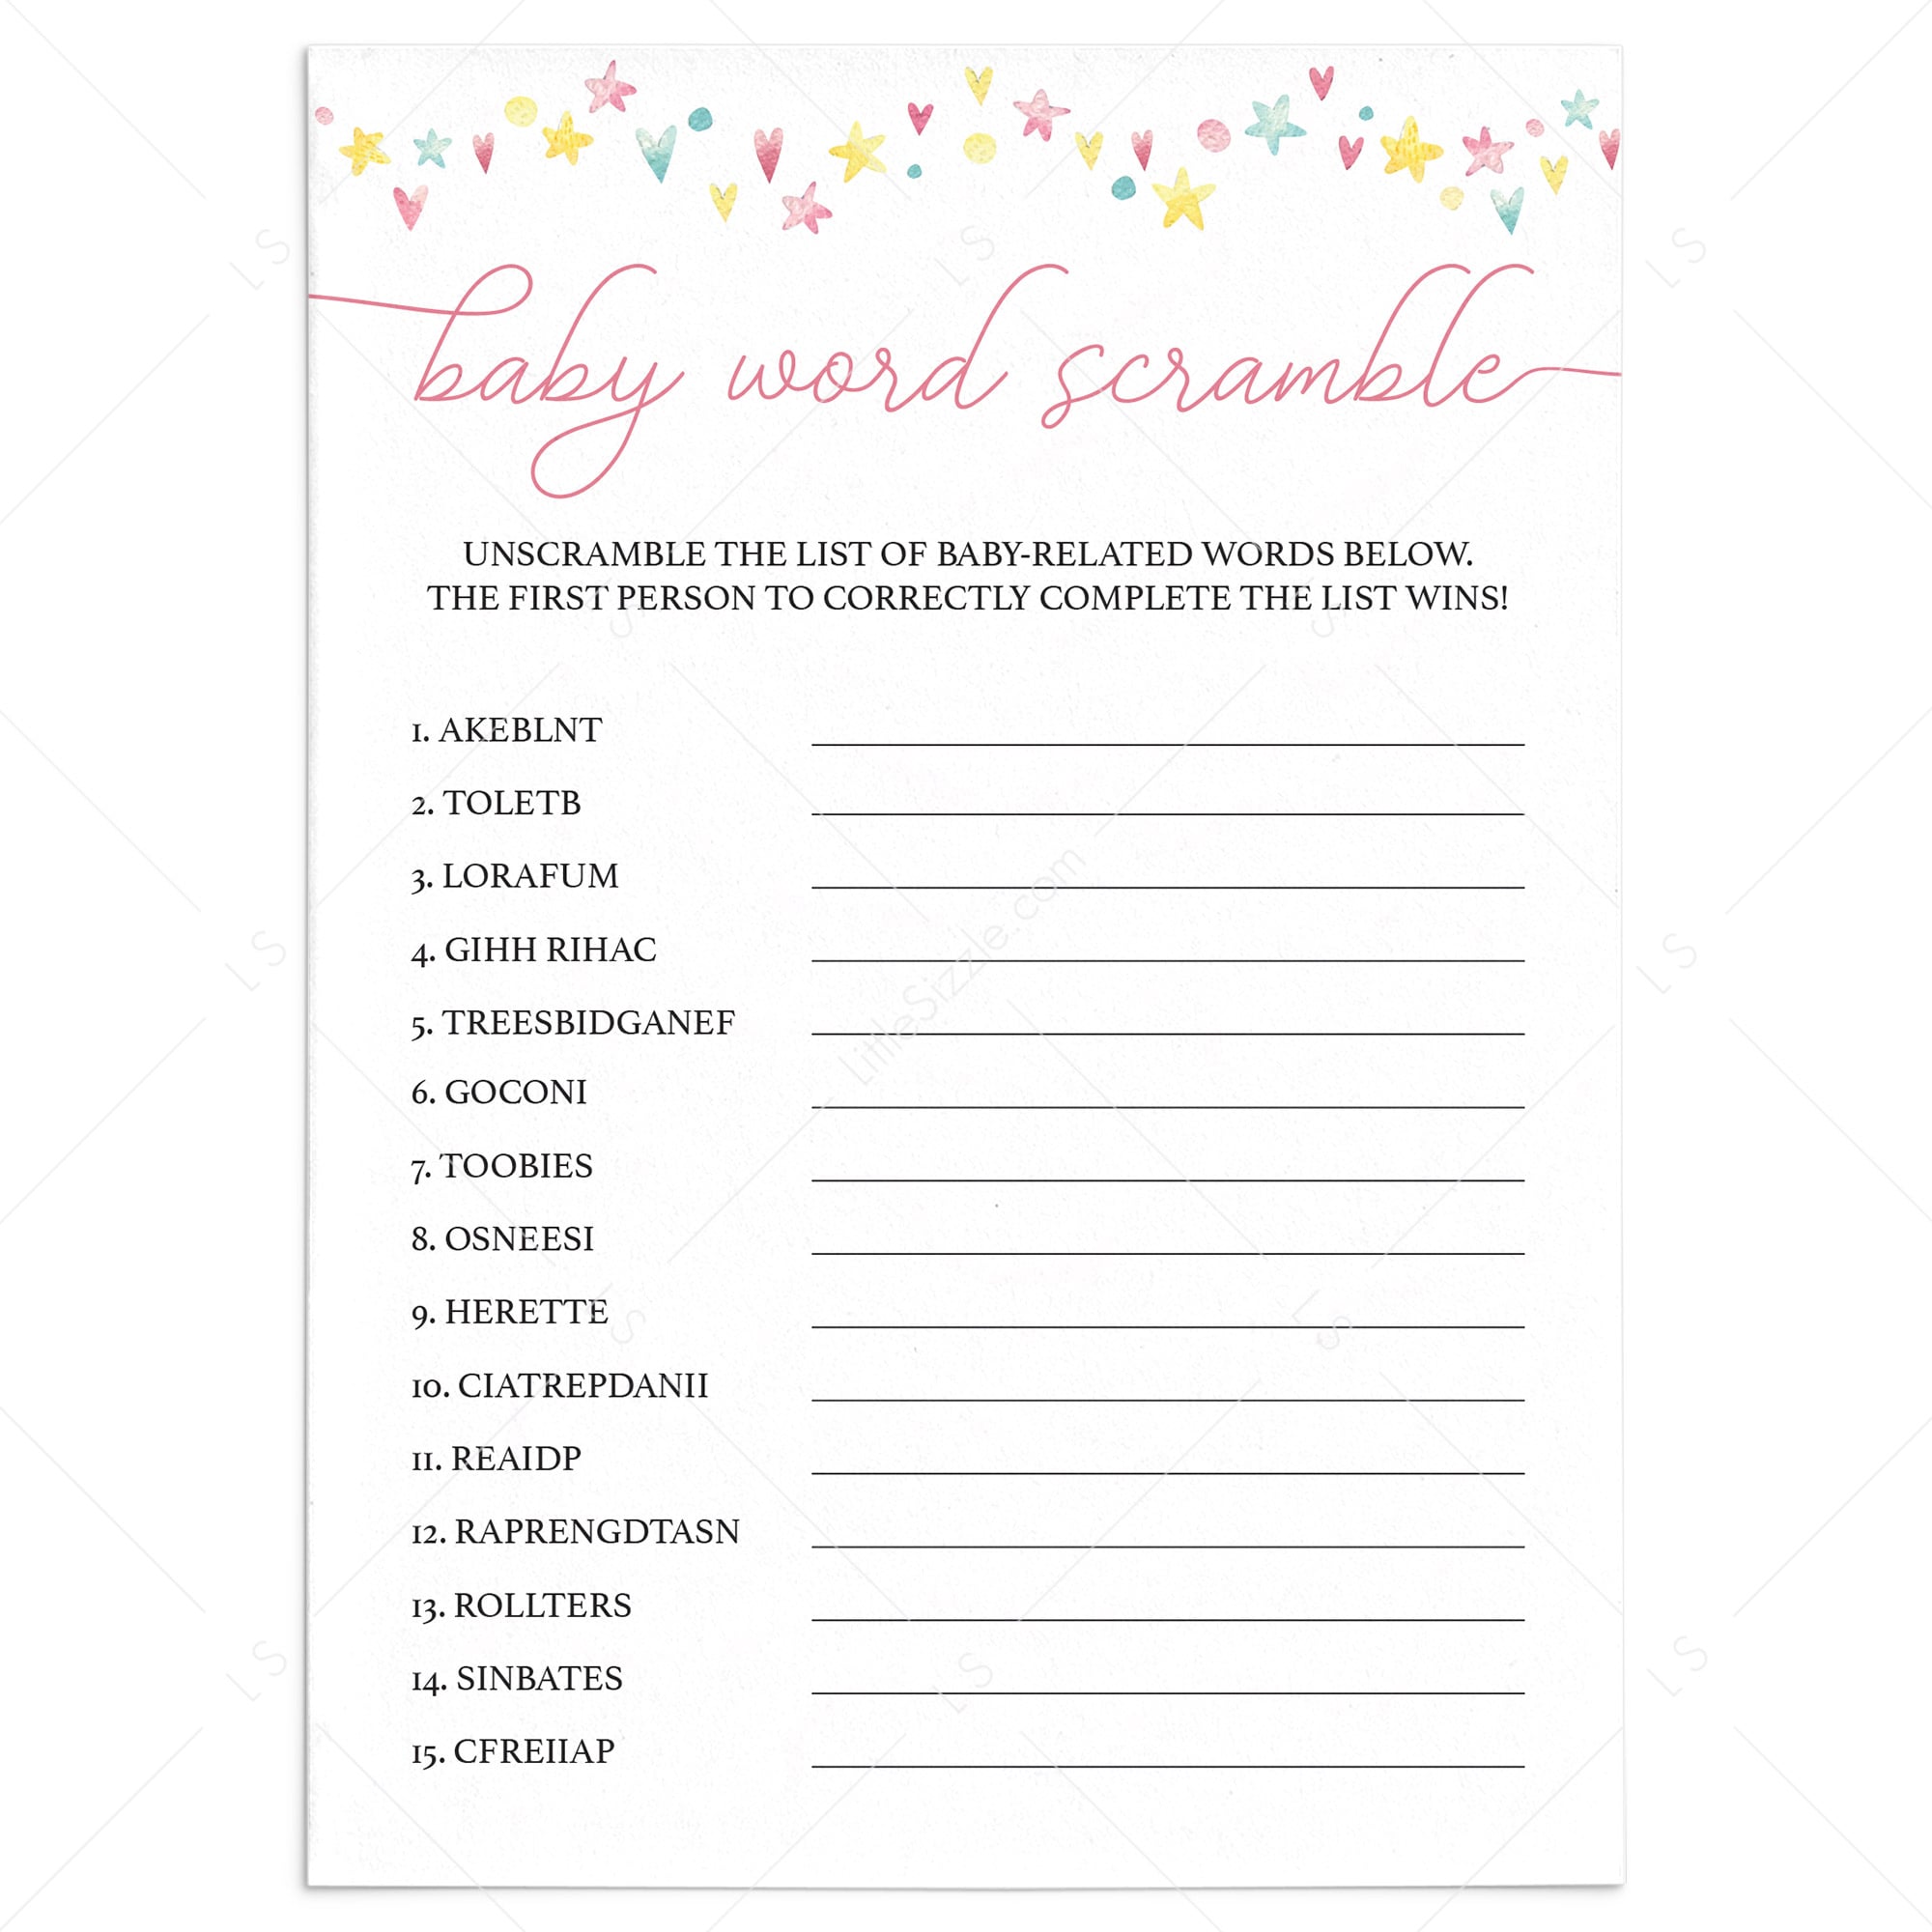 Printable word scramble game for girl baby shower by LittleSizzle